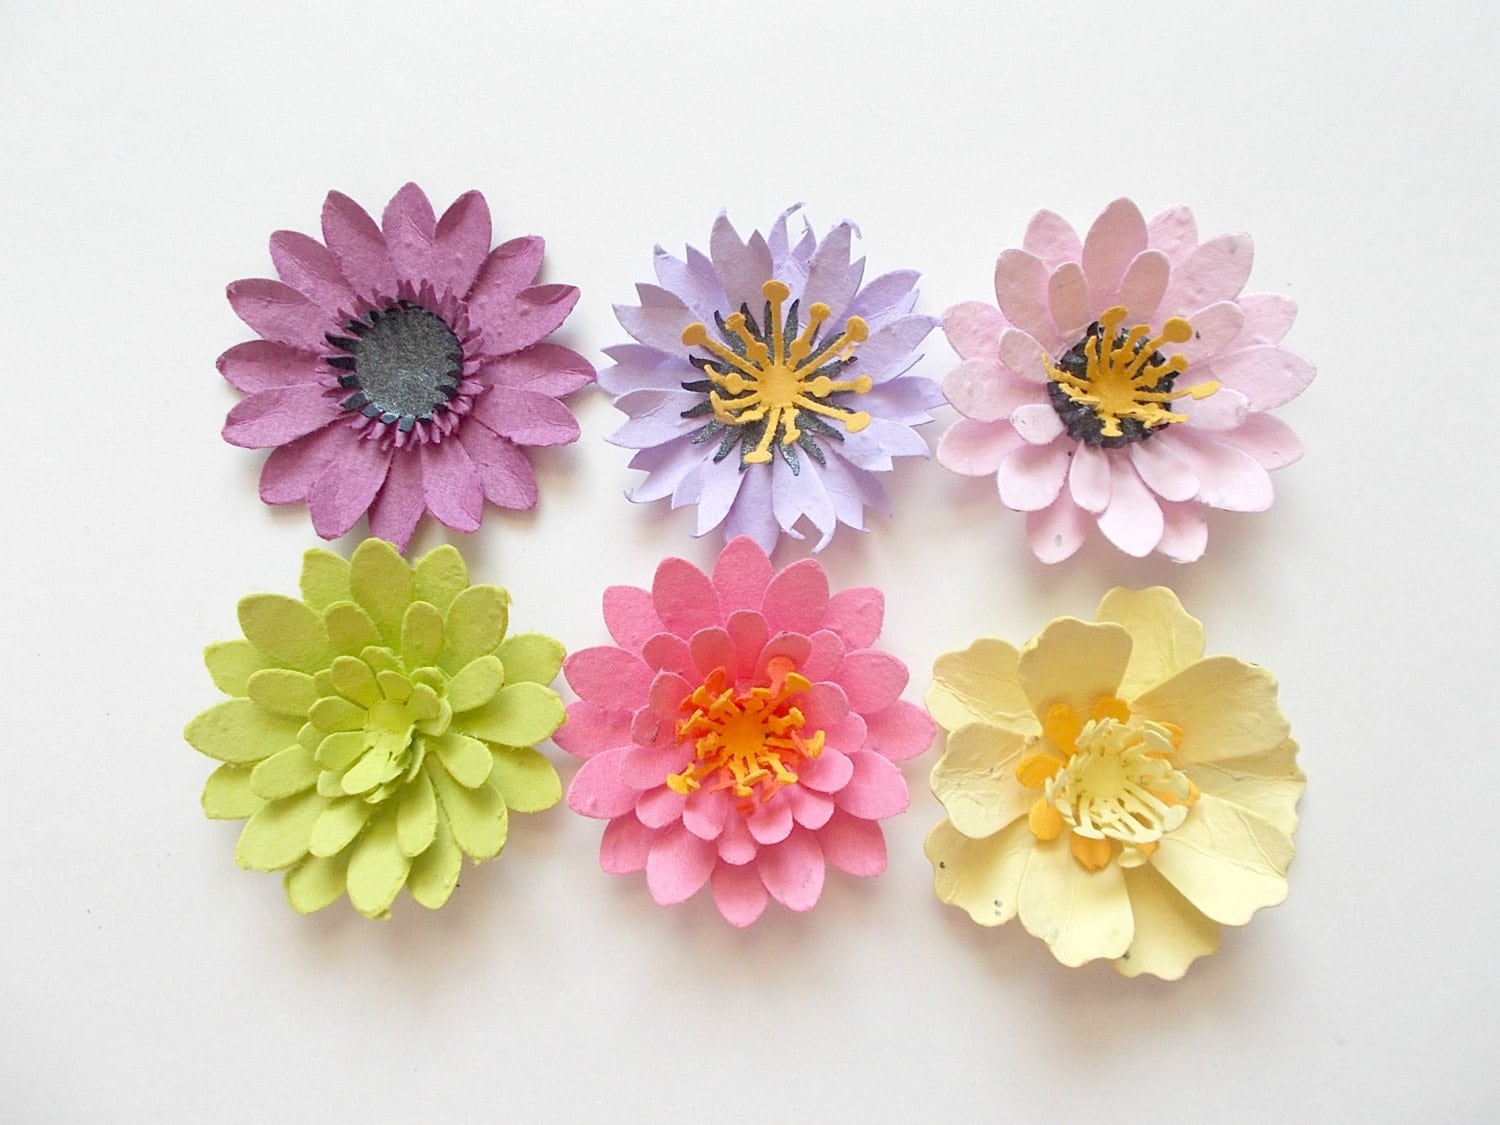 Seed Paper Flowers  - Plantable Desert Cactus Blooms Sample Pack of 6 - Eco Friendly Flowers - Plant and Grow Gardening Gift